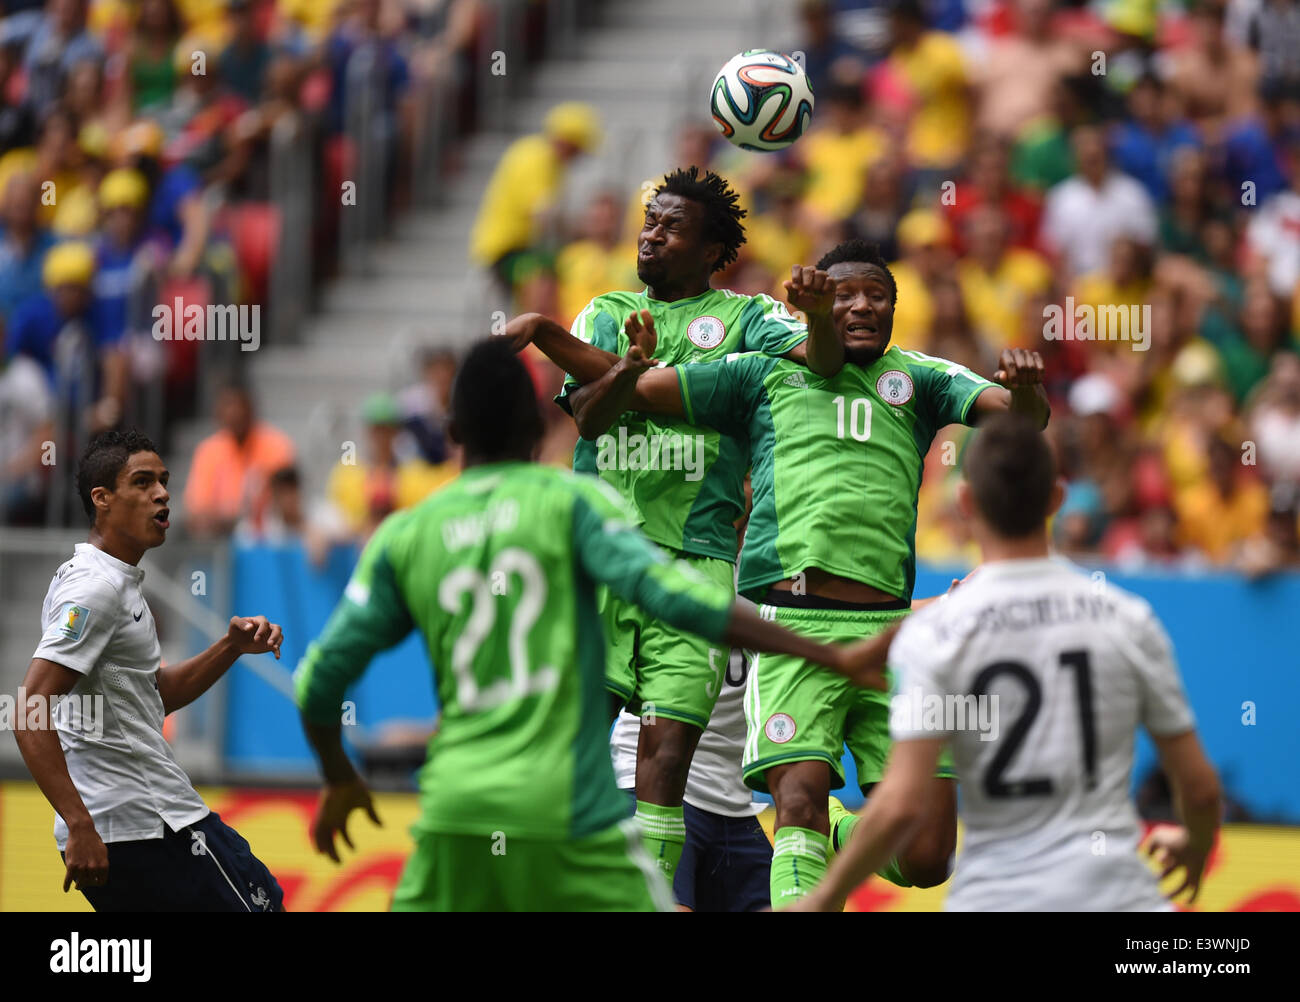 Brasilia, Brazil. 30th June, 2014. Efe Ambrose (C-L) and John Obi Mikel (C-R) of Nigeria go up for a header during the FIFA World Cup 2014 round of 16 match between France and Nigeria at the Estadio National Stadium in Brasilia, Brazil, on 30 June 2014. Credit:  dpa picture alliance/Alamy Live News Stock Photo